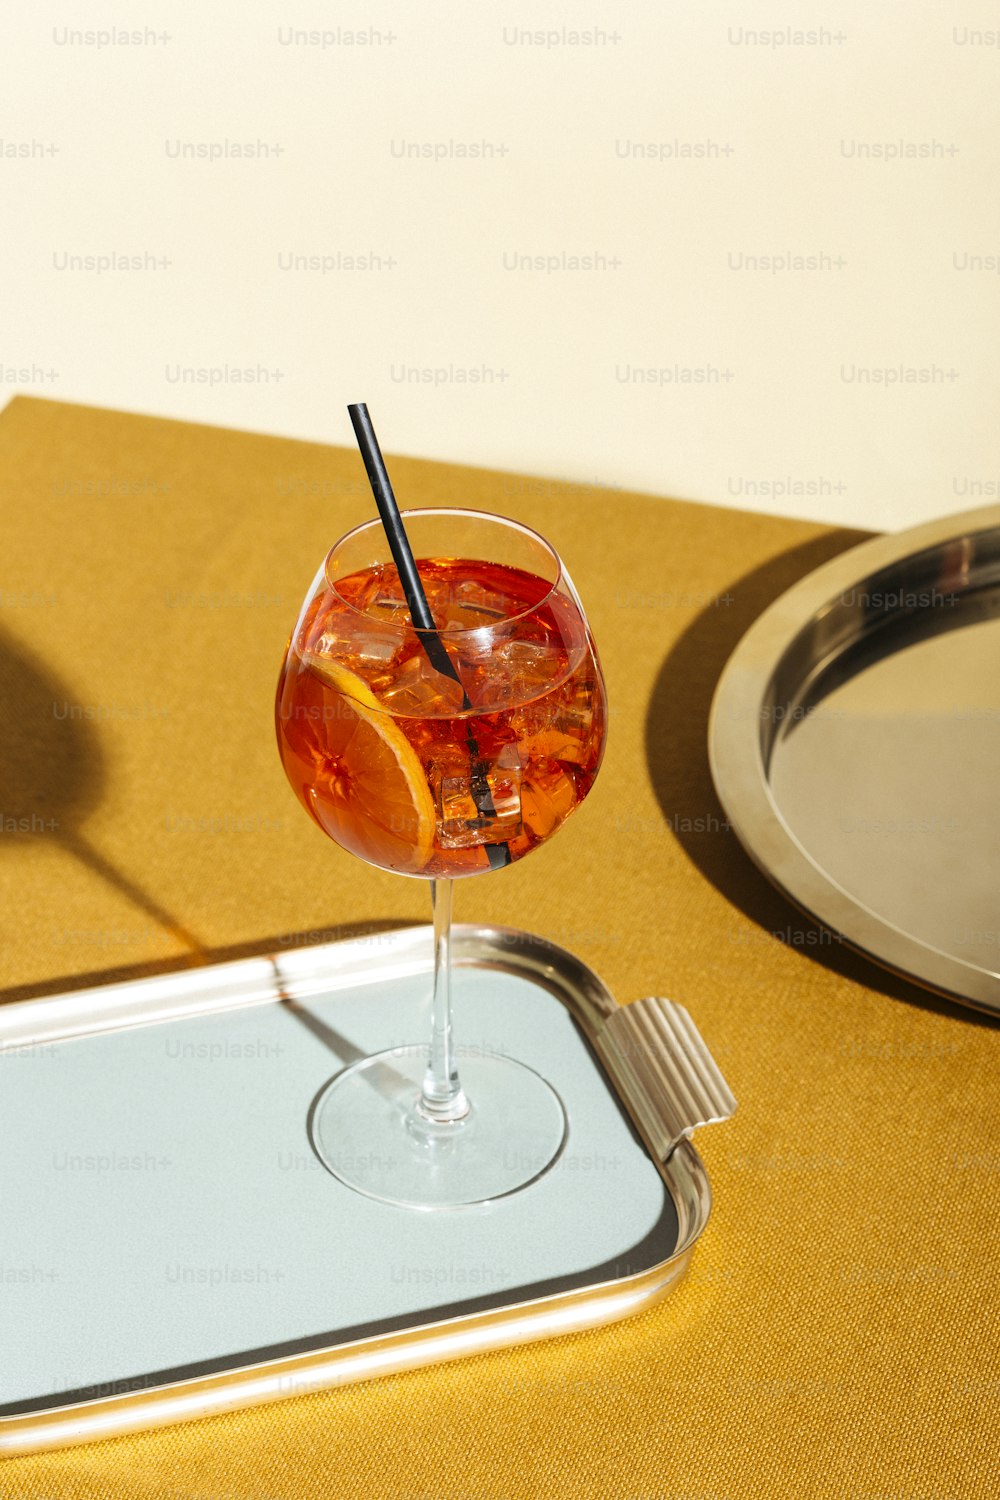 Spritz veneziano, an aperitif cocktail with Prosecco or white sparkling wine, bitter, soda, ice and a slice of orange, in a calix on a table, pop graphic style